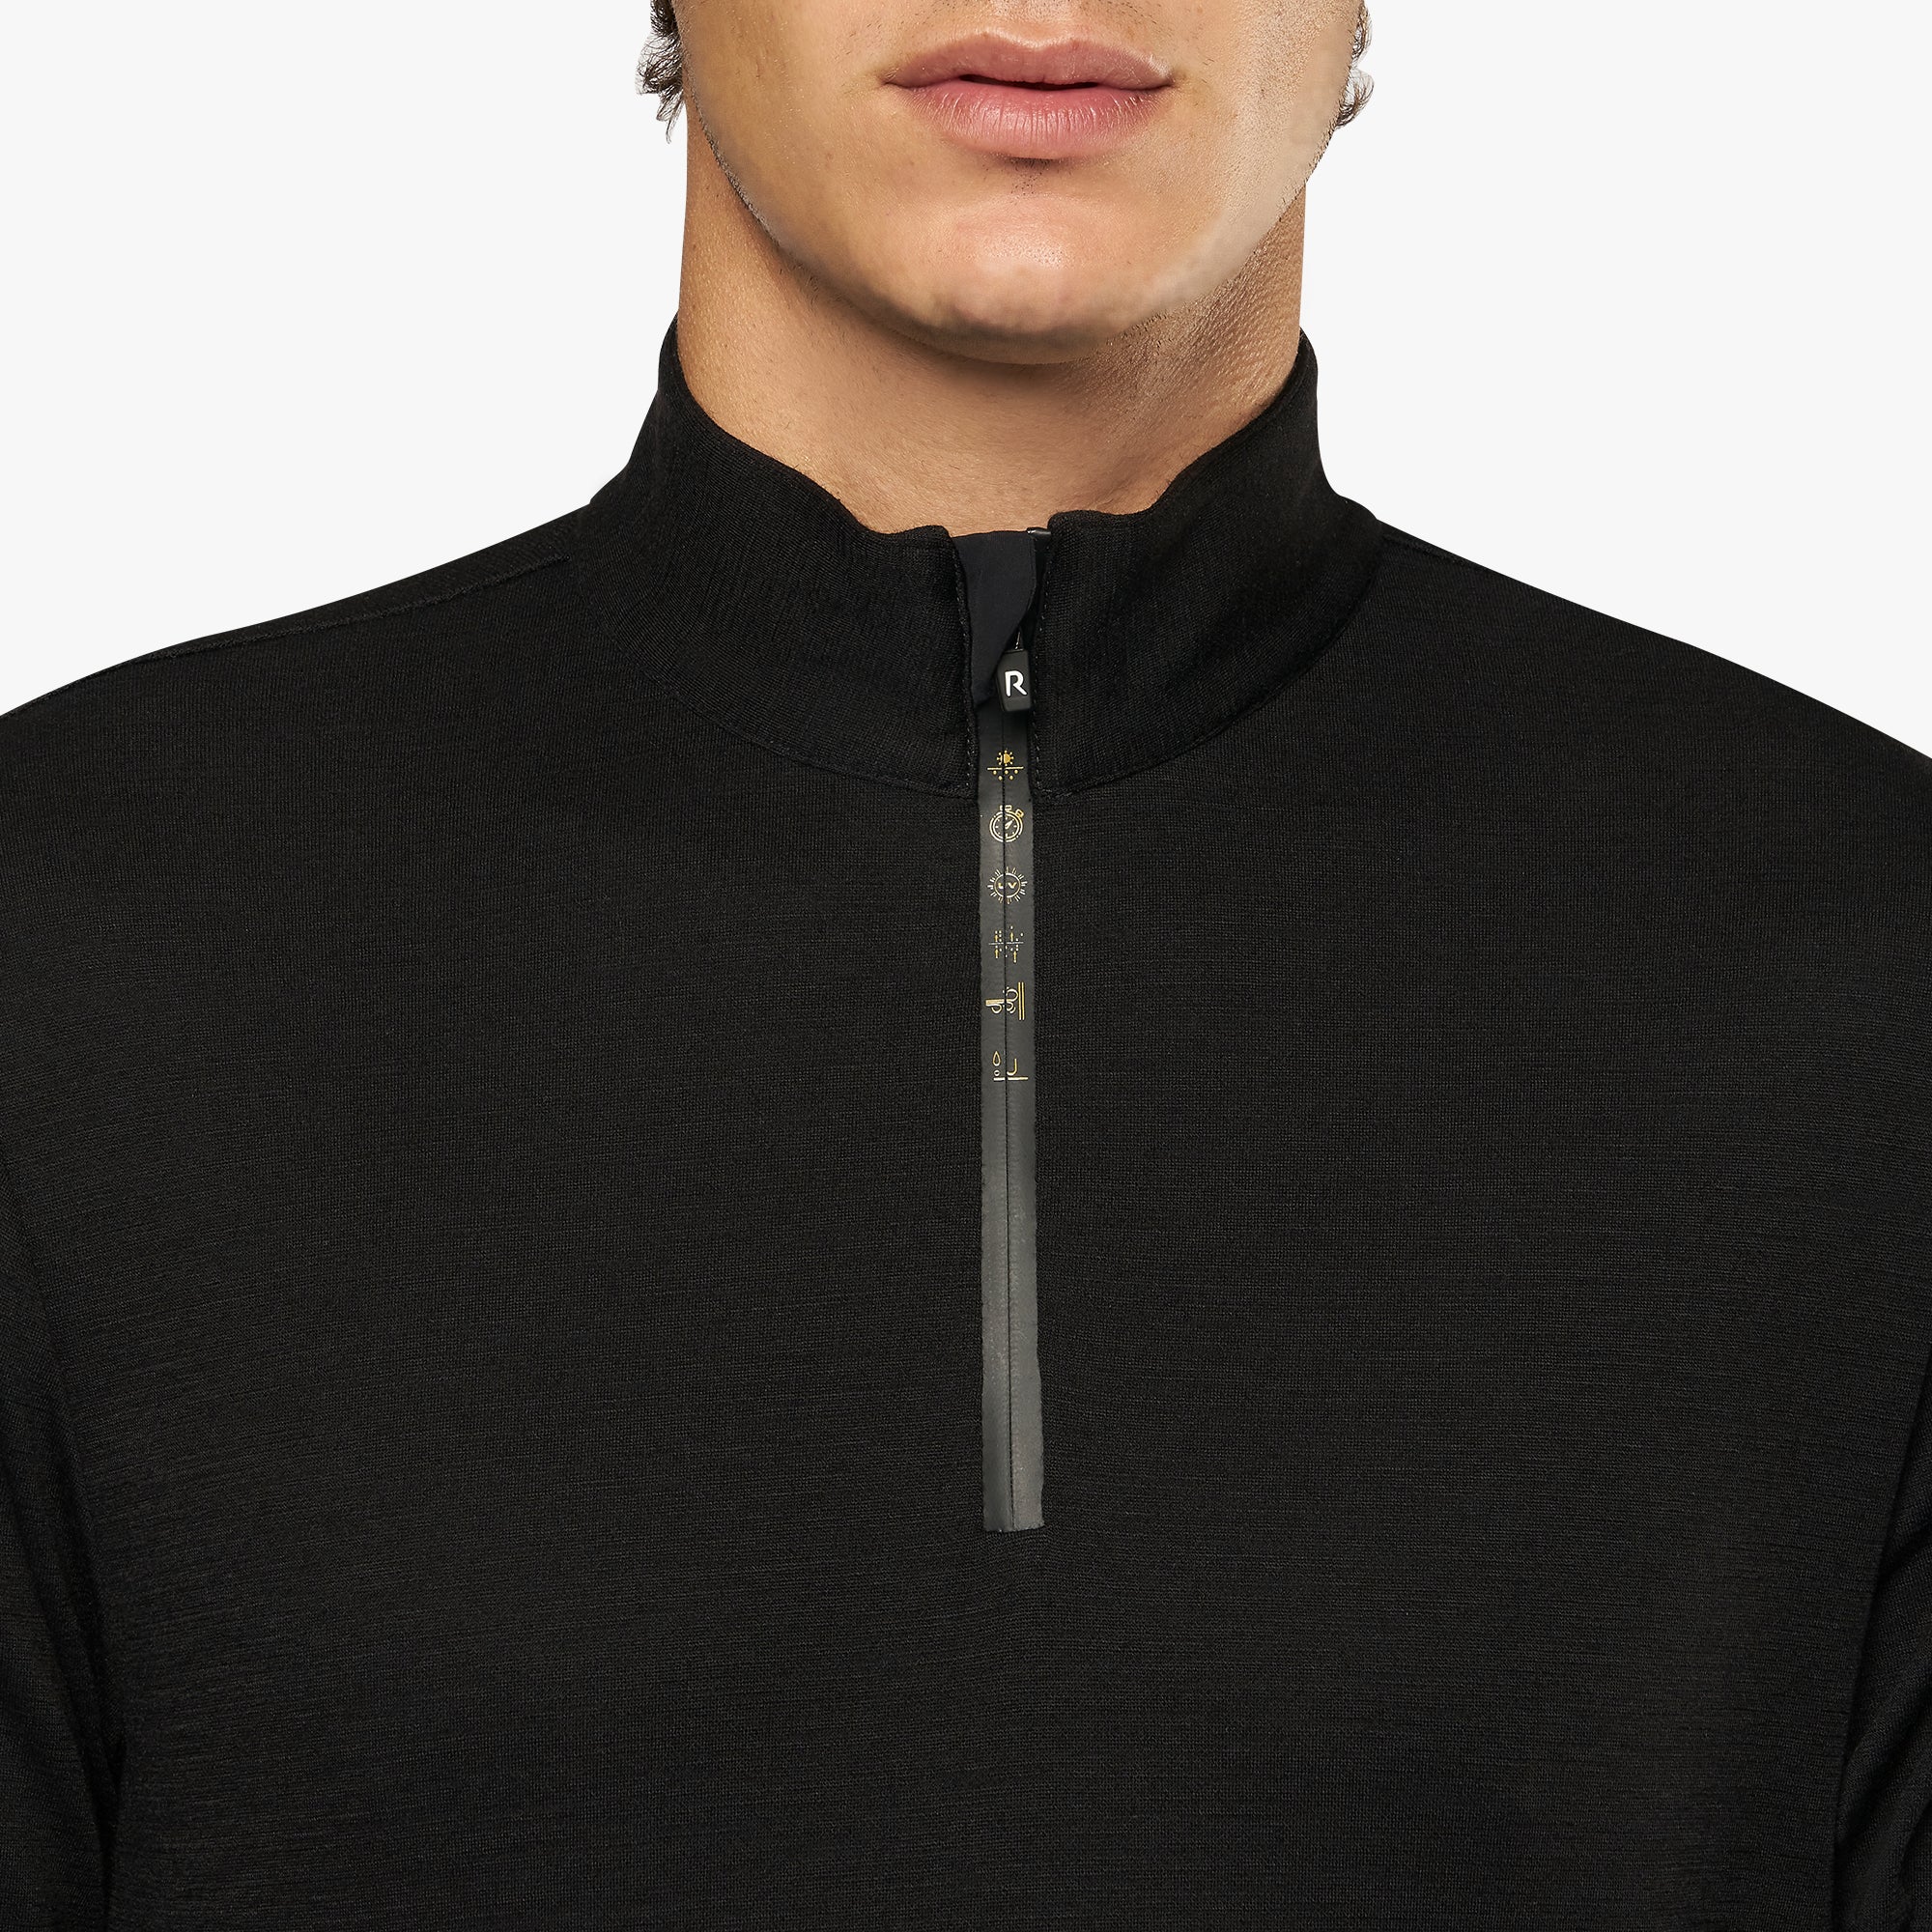 R-EVO LONG SLEEVES ZIP COMPETITION POLOSHIRT